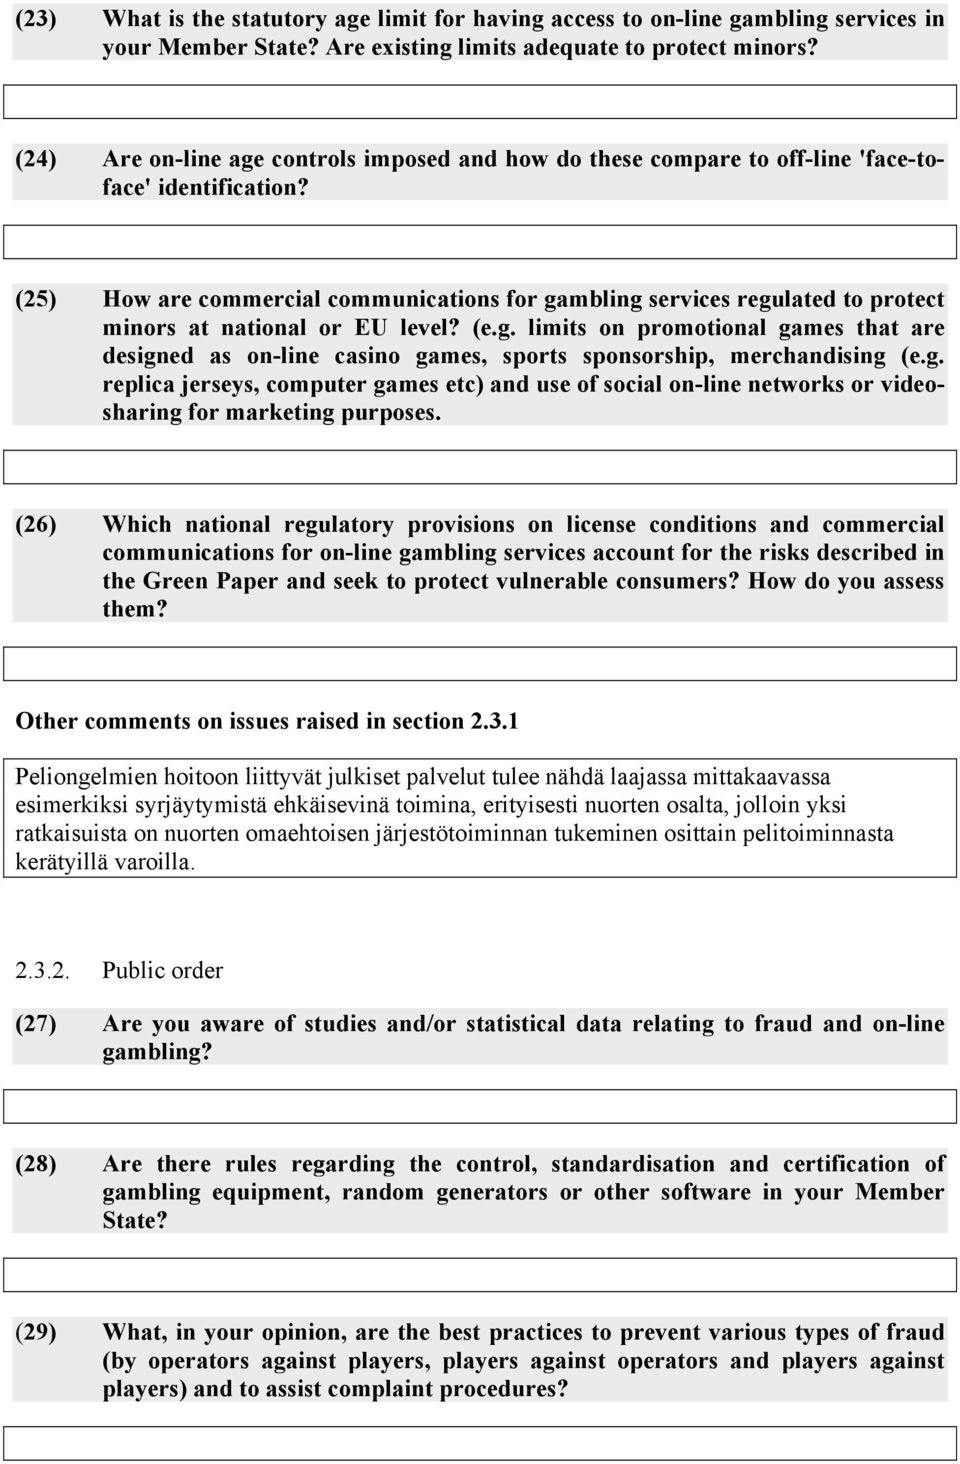 (25) How are commercial communications for gambling services regulated to protect minors at national or EU level? (e.g. limits on promotional games that are designed as on-line casino games, sports sponsorship, merchandising (e.